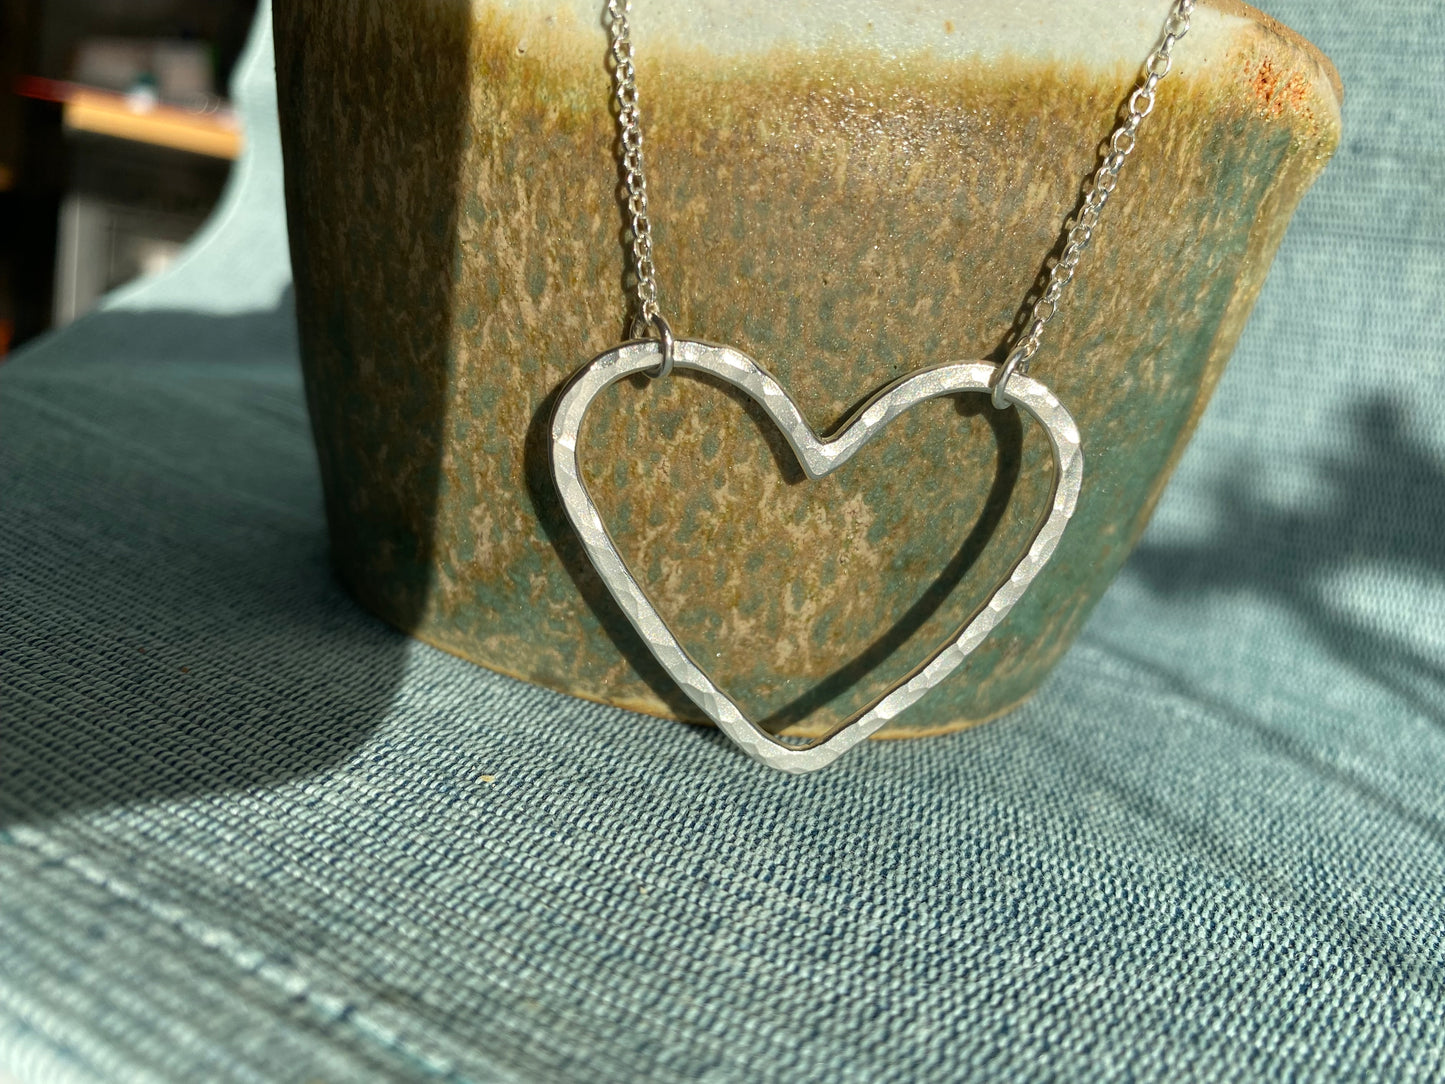 Statement silver heart necklace